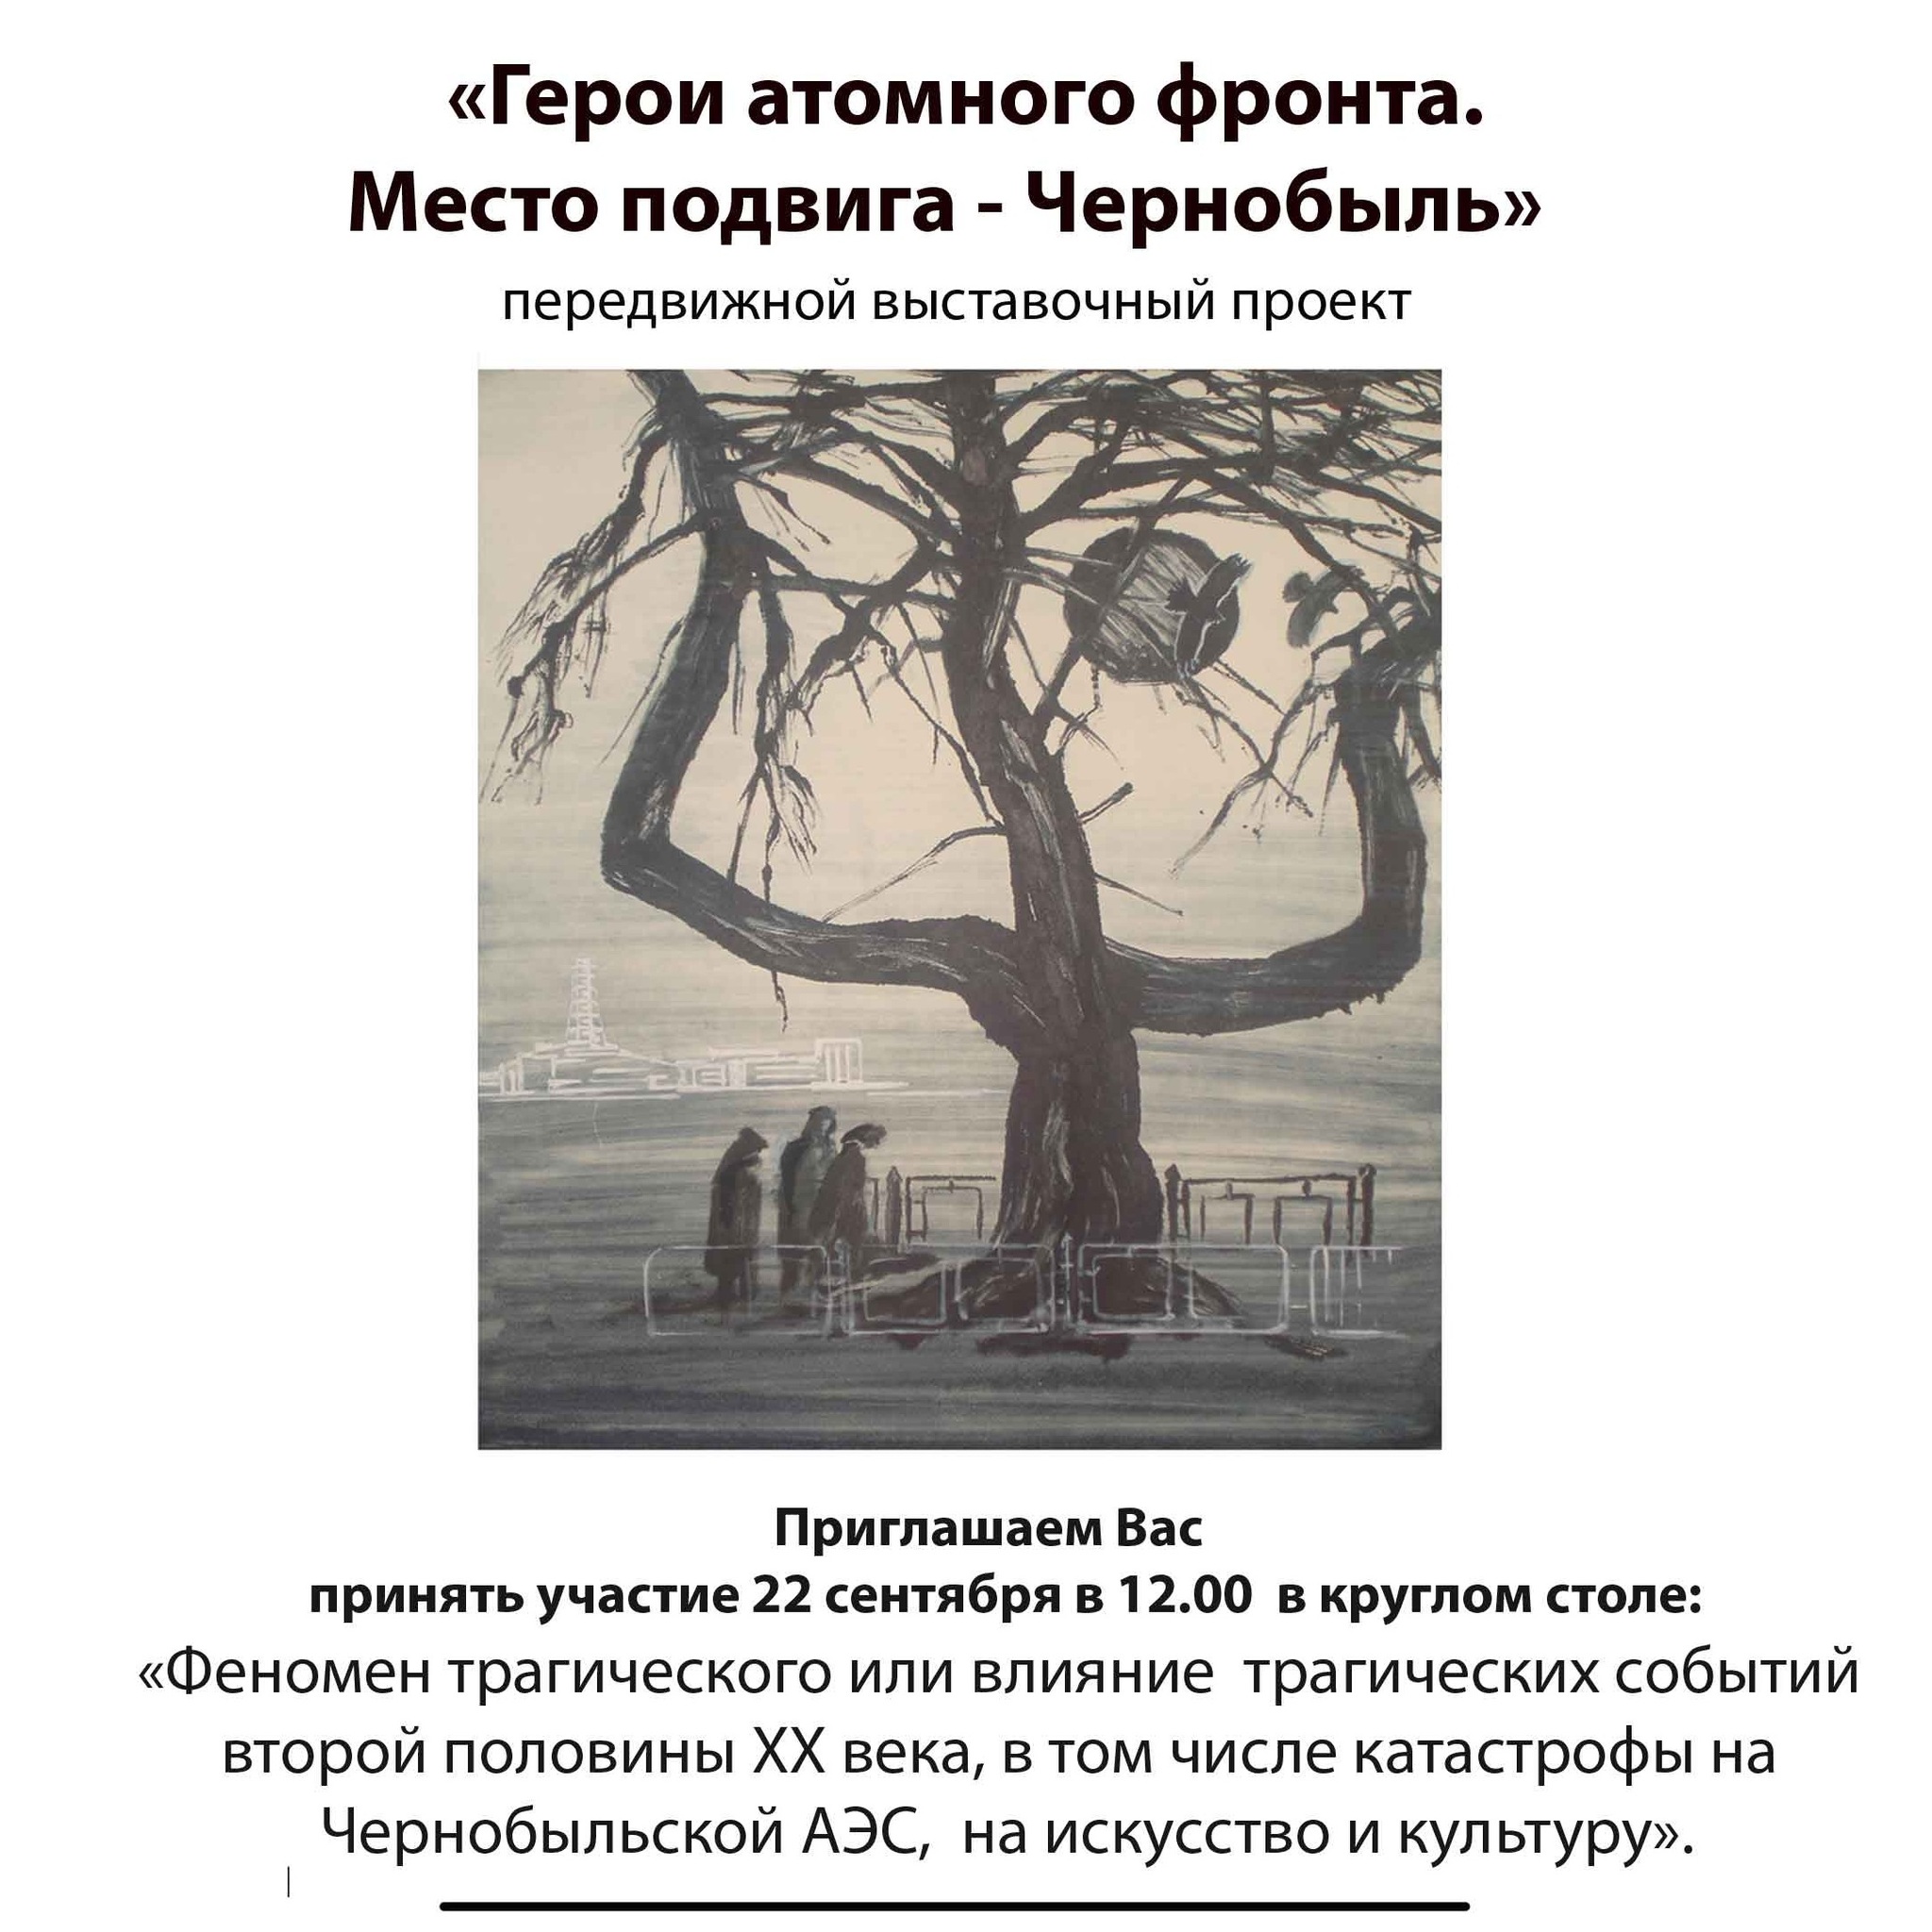 Round table The phenomenon of the tragic or the impact of the tragic events of the second half of the XX century, including the Chernobyl accident, for art and culture